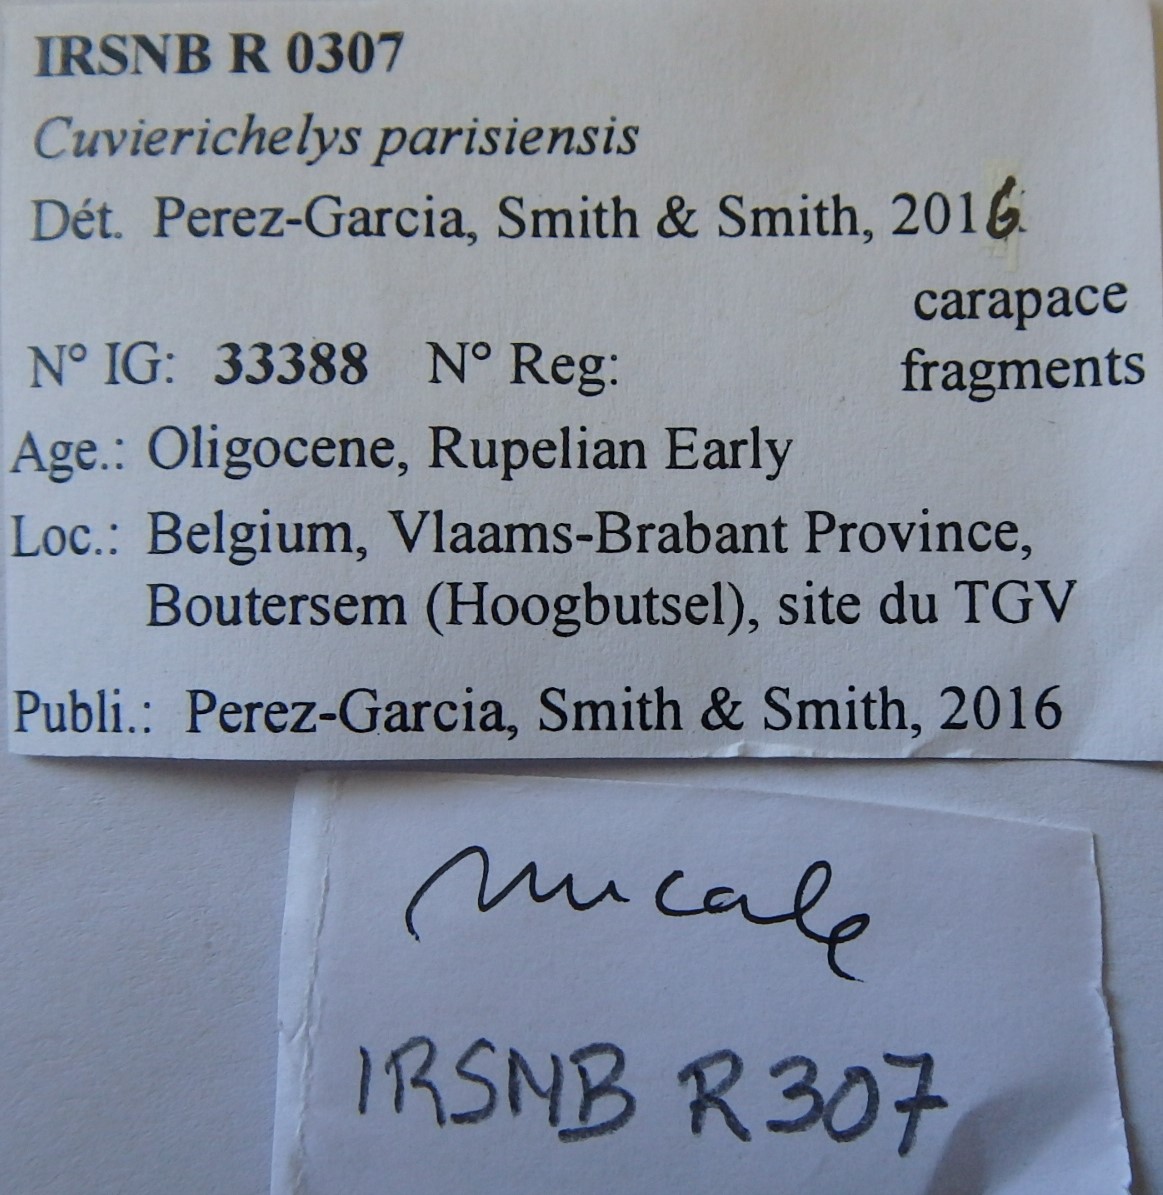 IRSNB R 0307 Labels